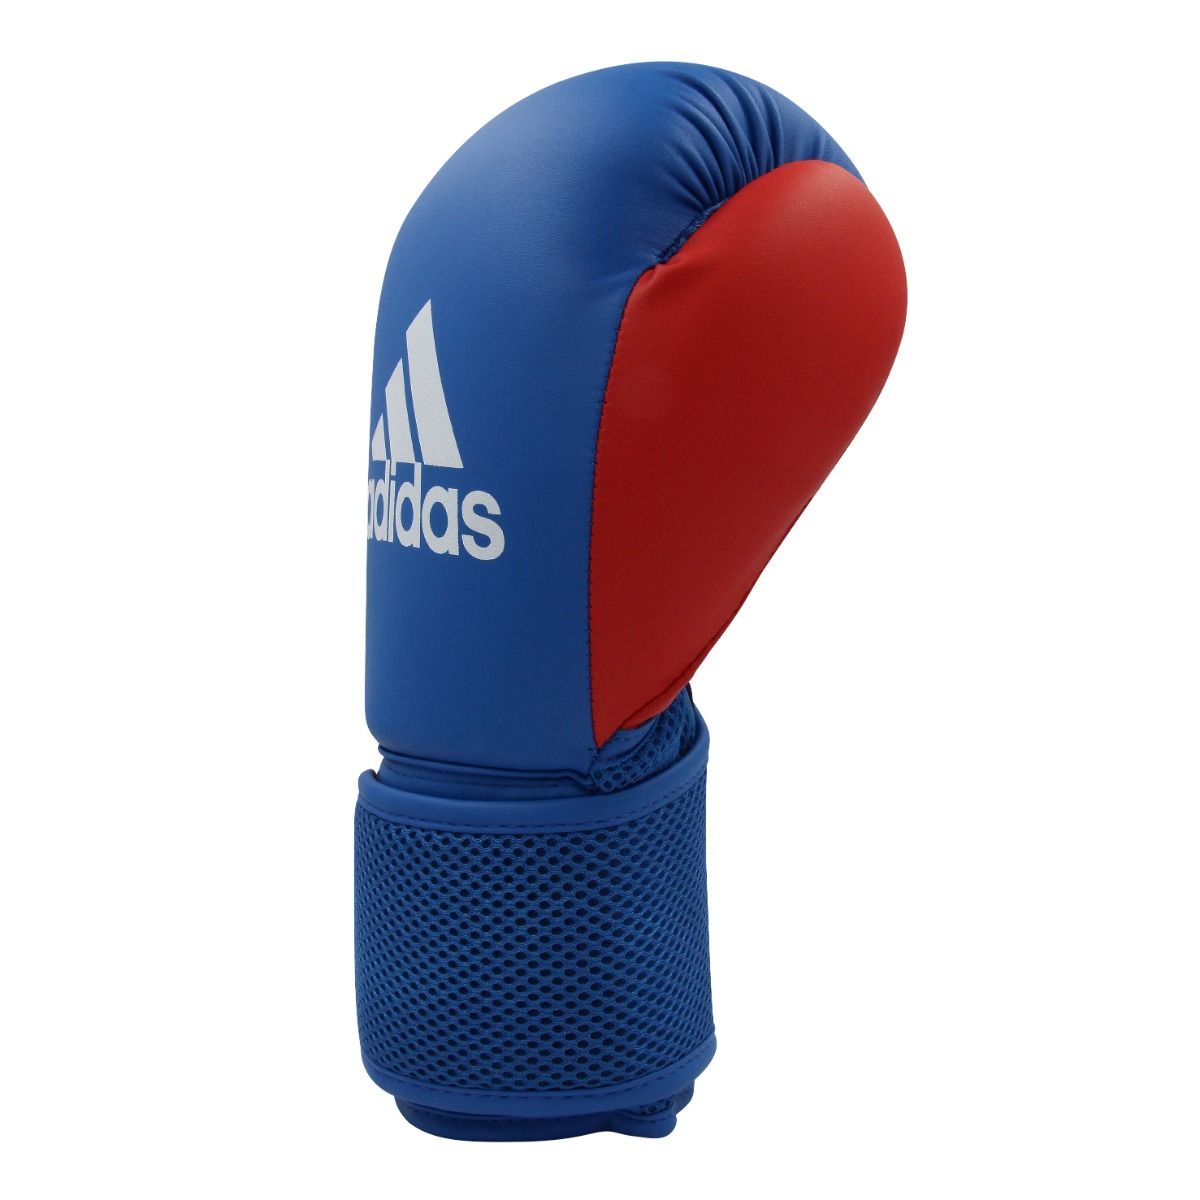 ADIDAS BOXING GLOVES AND FOCUS MITTS SET